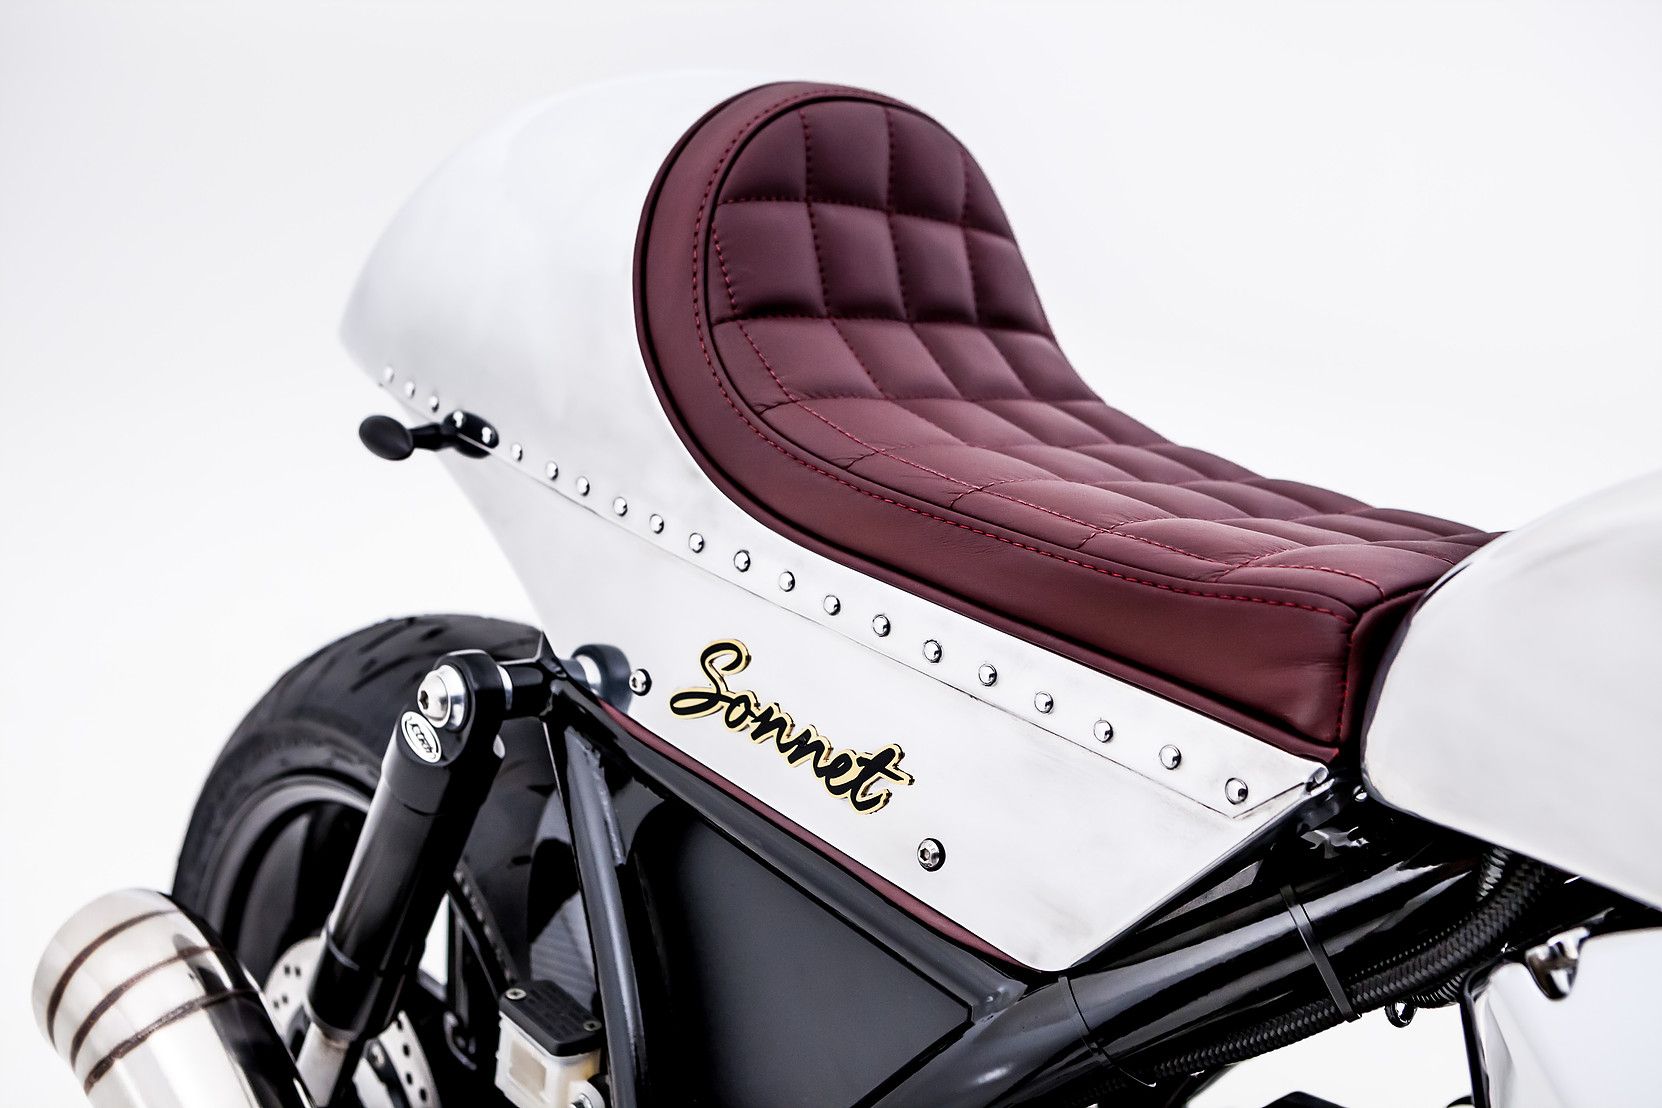 Seat Details - Hesketh Sonnet Motorcycle